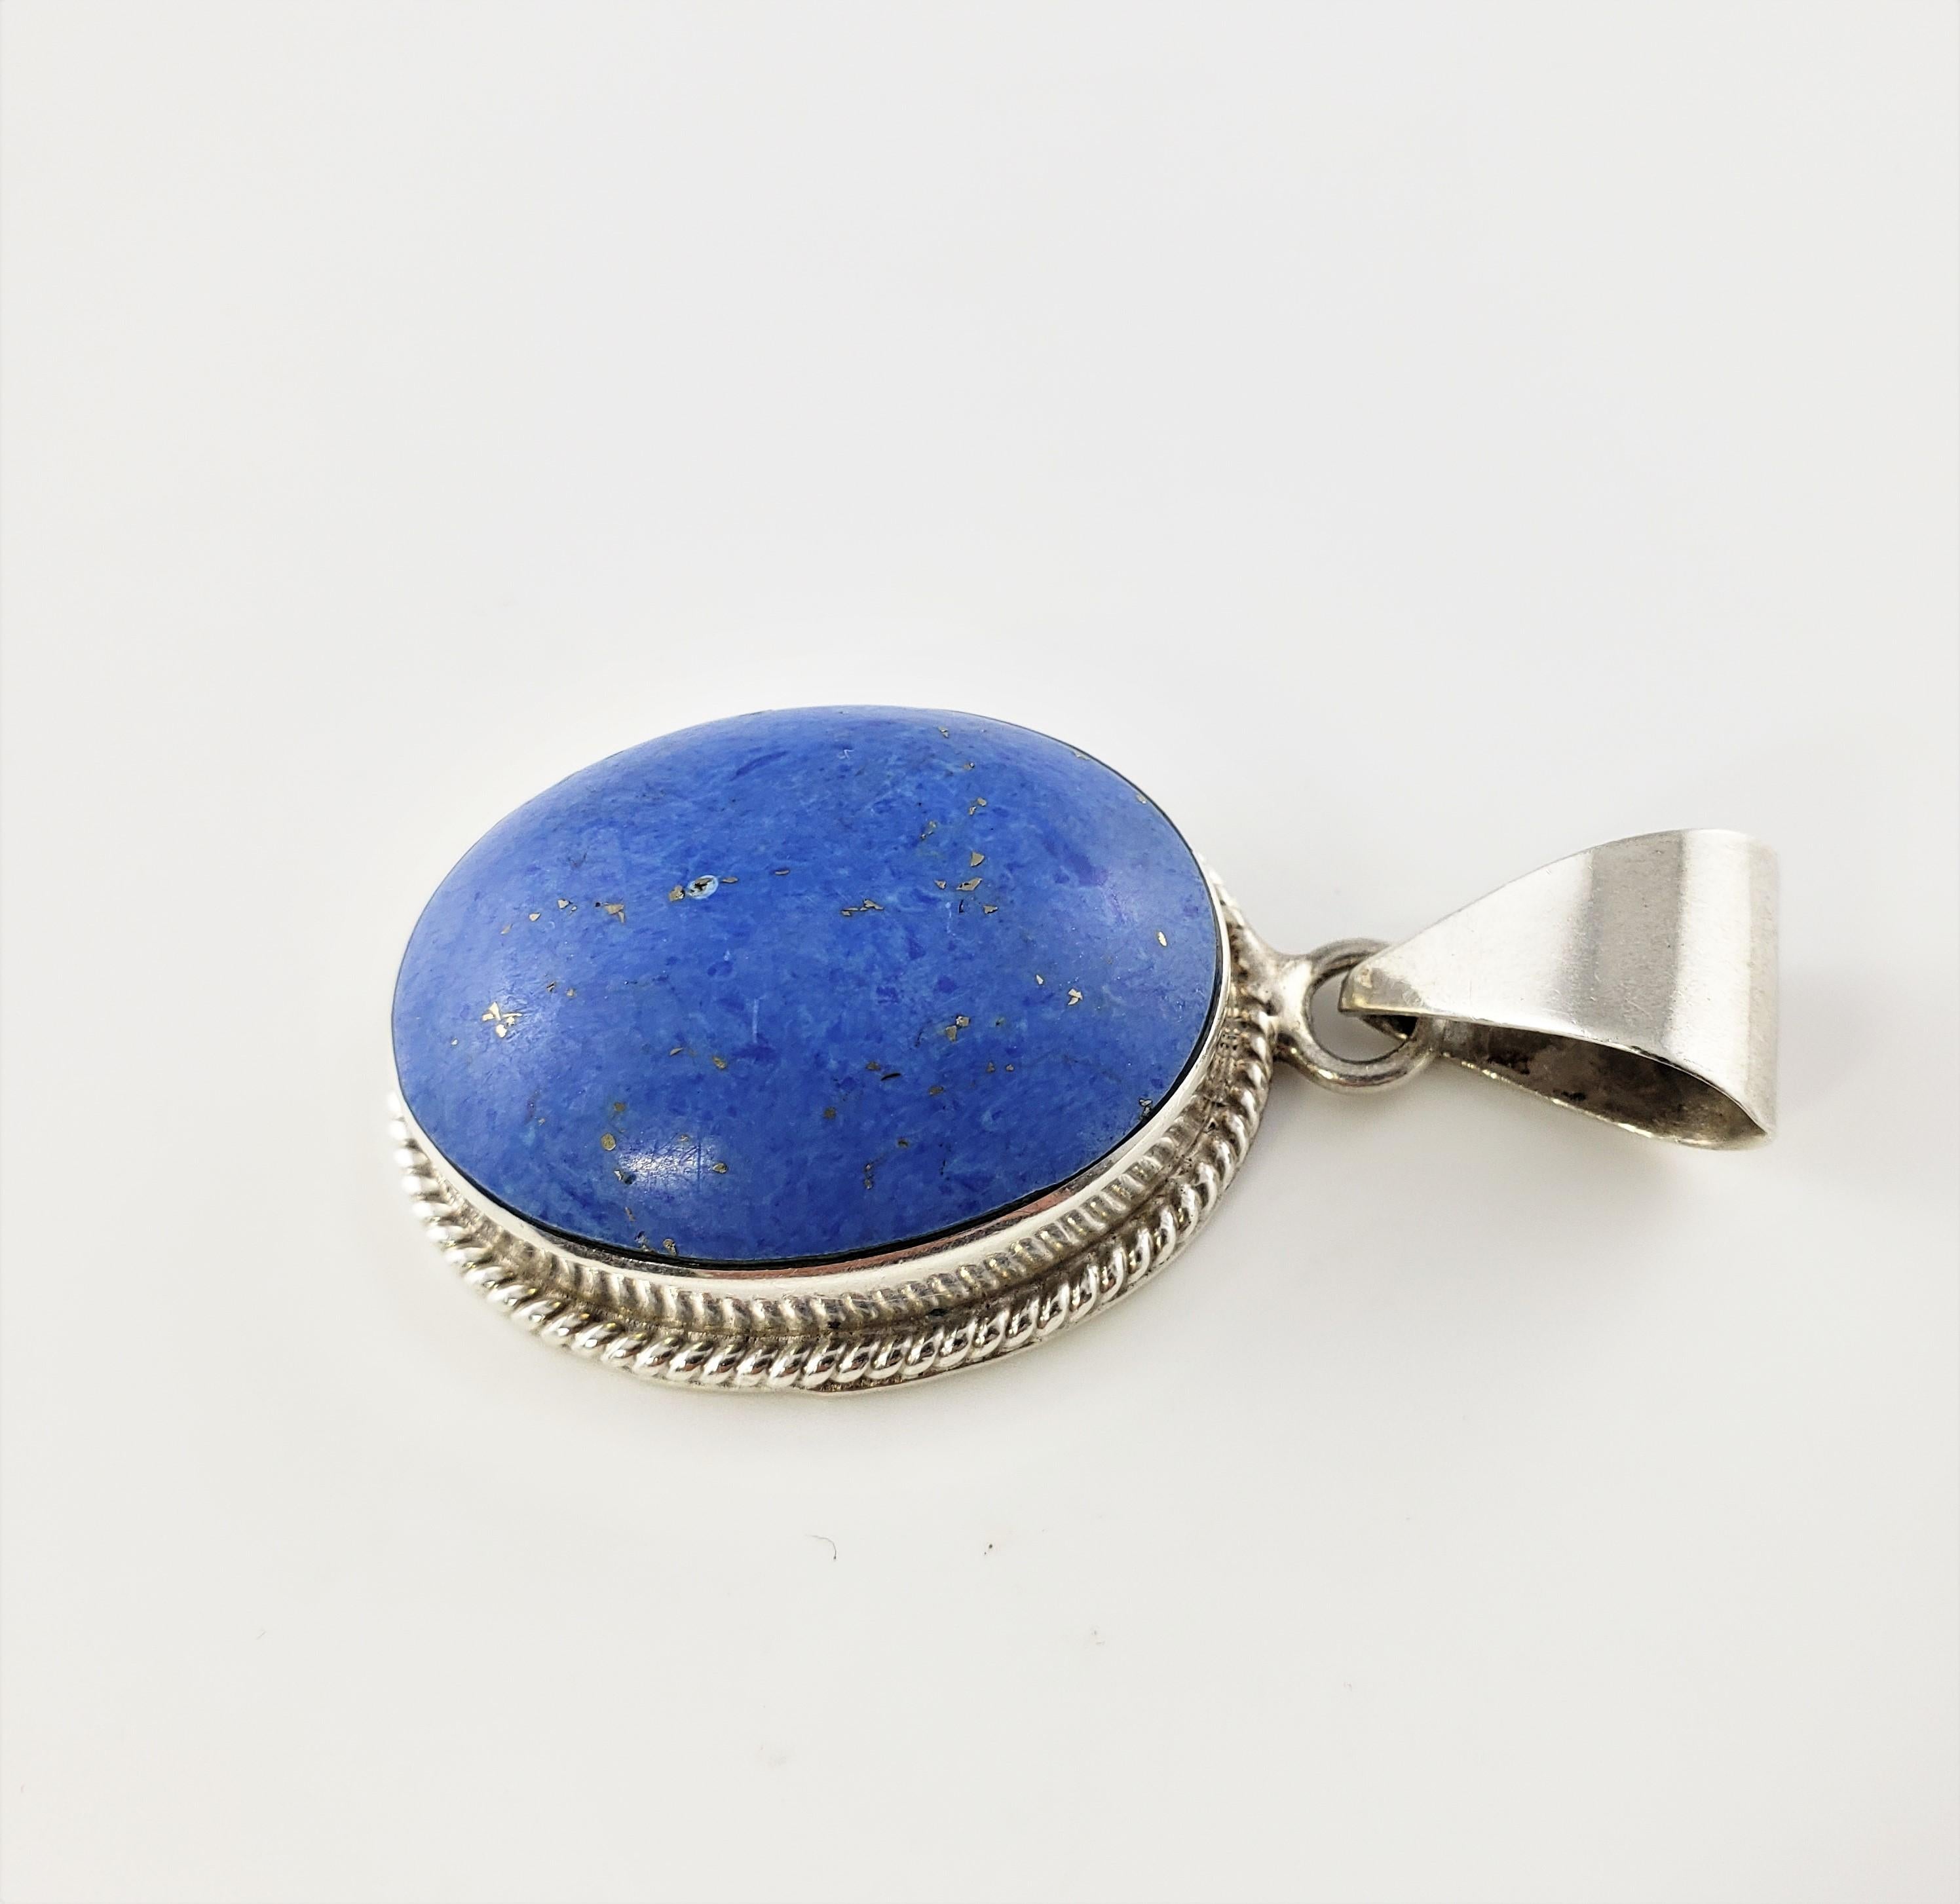 Vintage Taxco Mexico TM-287 Sterling Silver and Denim Lapis Pendant-

This stunning pendant features one oval denim lapis stone (35 mm x 29 mm) set in beautifully detailed sterling silver.

Size: 48 mm x 33 mm (actual pendant)

Weight: 23.9 dwt. /